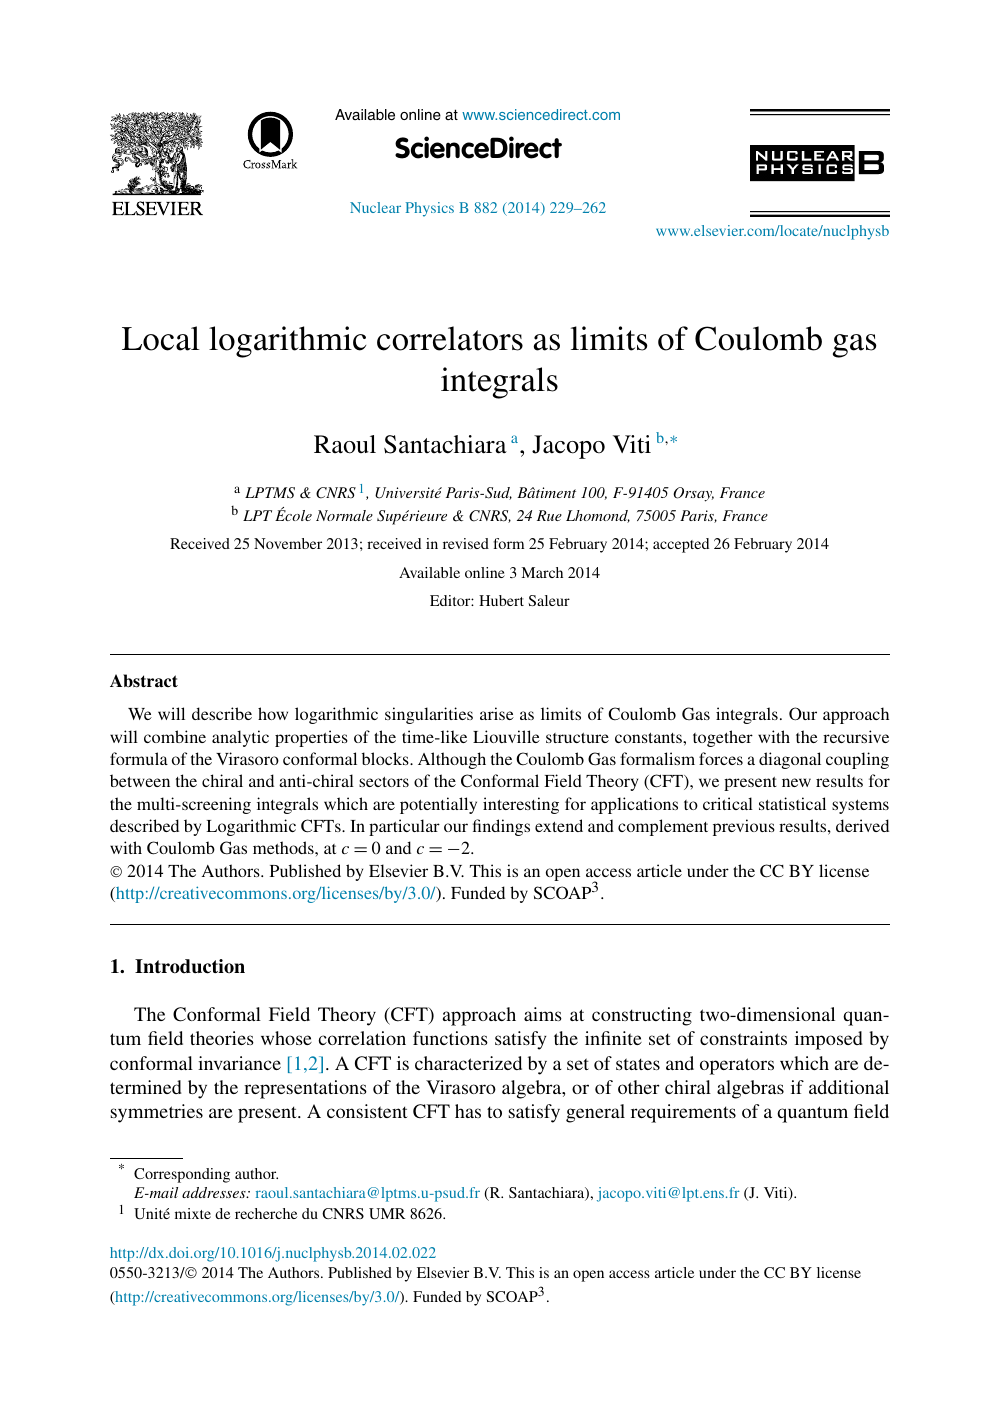 Local Logarithmic Correlators As Limits Of Coulomb Gas Integrals Topic Of Research Paper In Physical Sciences Download Scholarly Article Pdf And Read For Free On Cyberleninka Open Science Hub